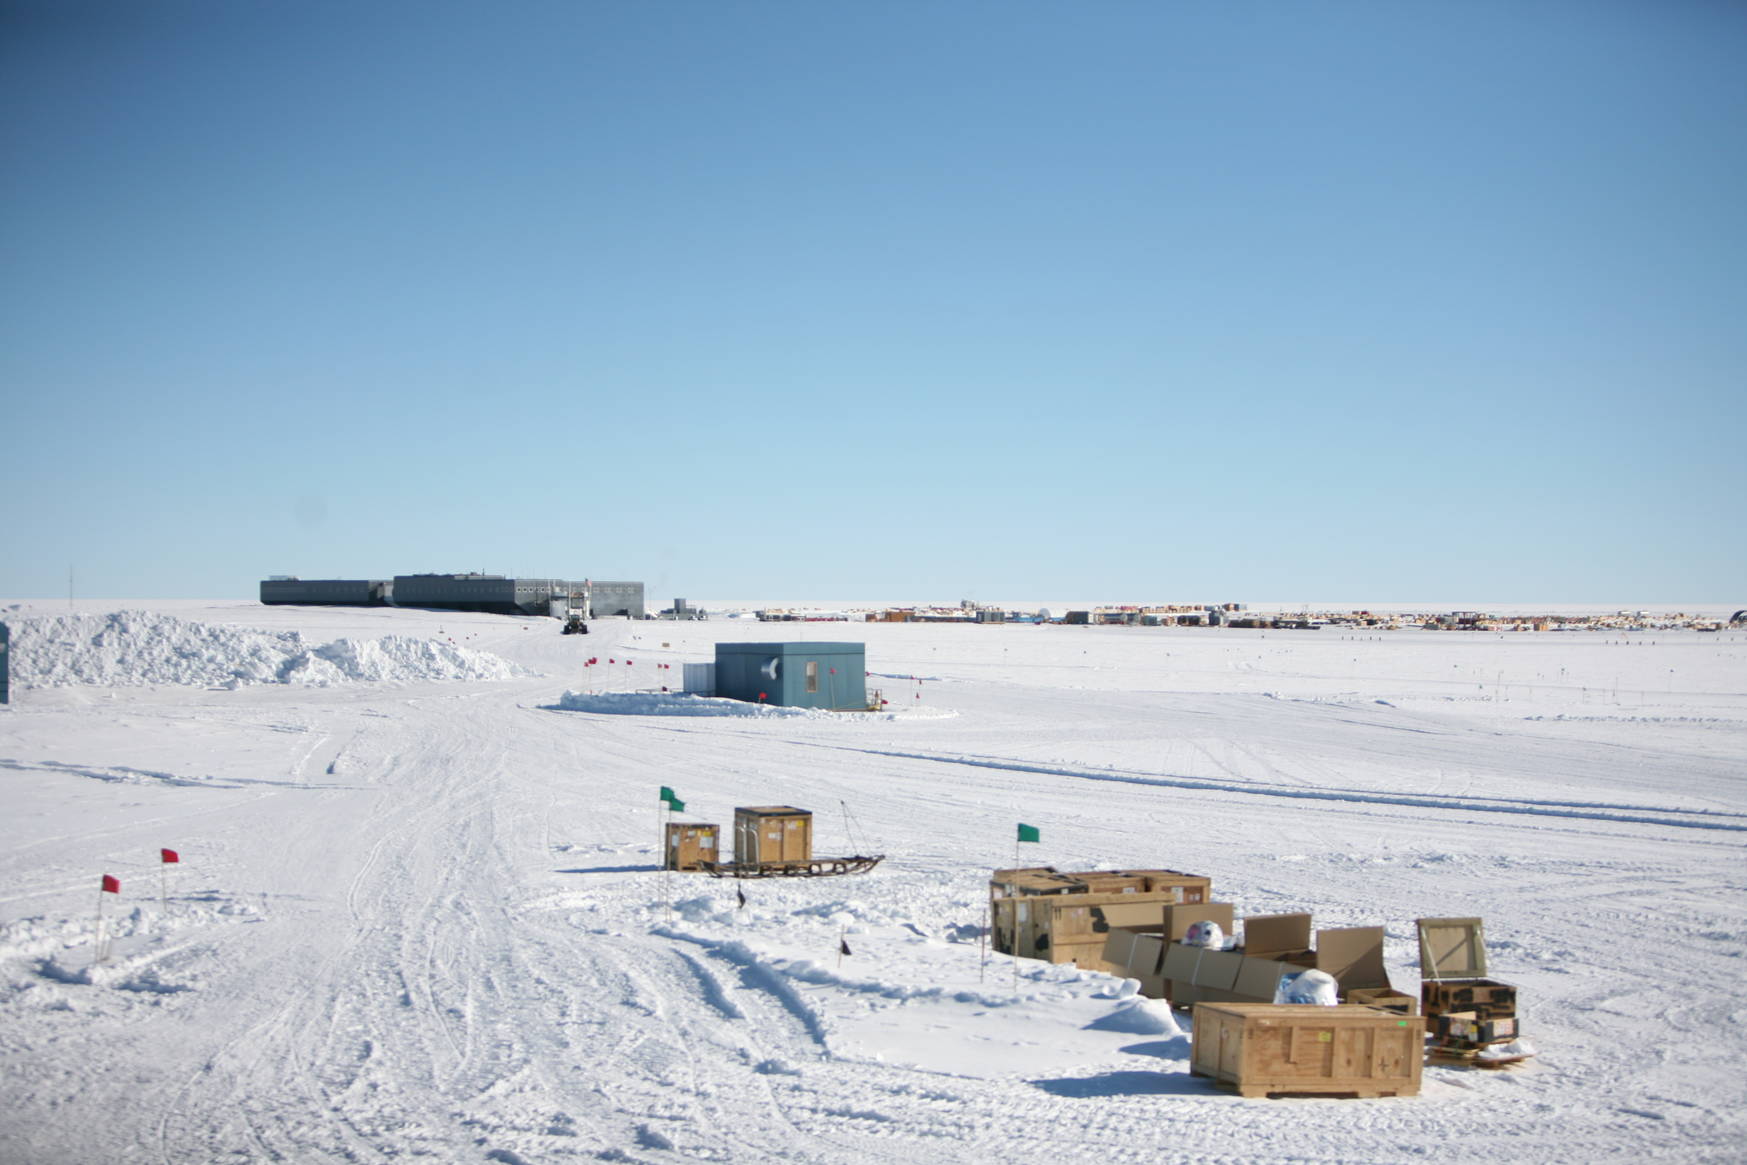 My way to work is approximately one
kilometer. This picture is taken from the South Pole Telescope (where I work)
facing the station (where we eat and sleep).